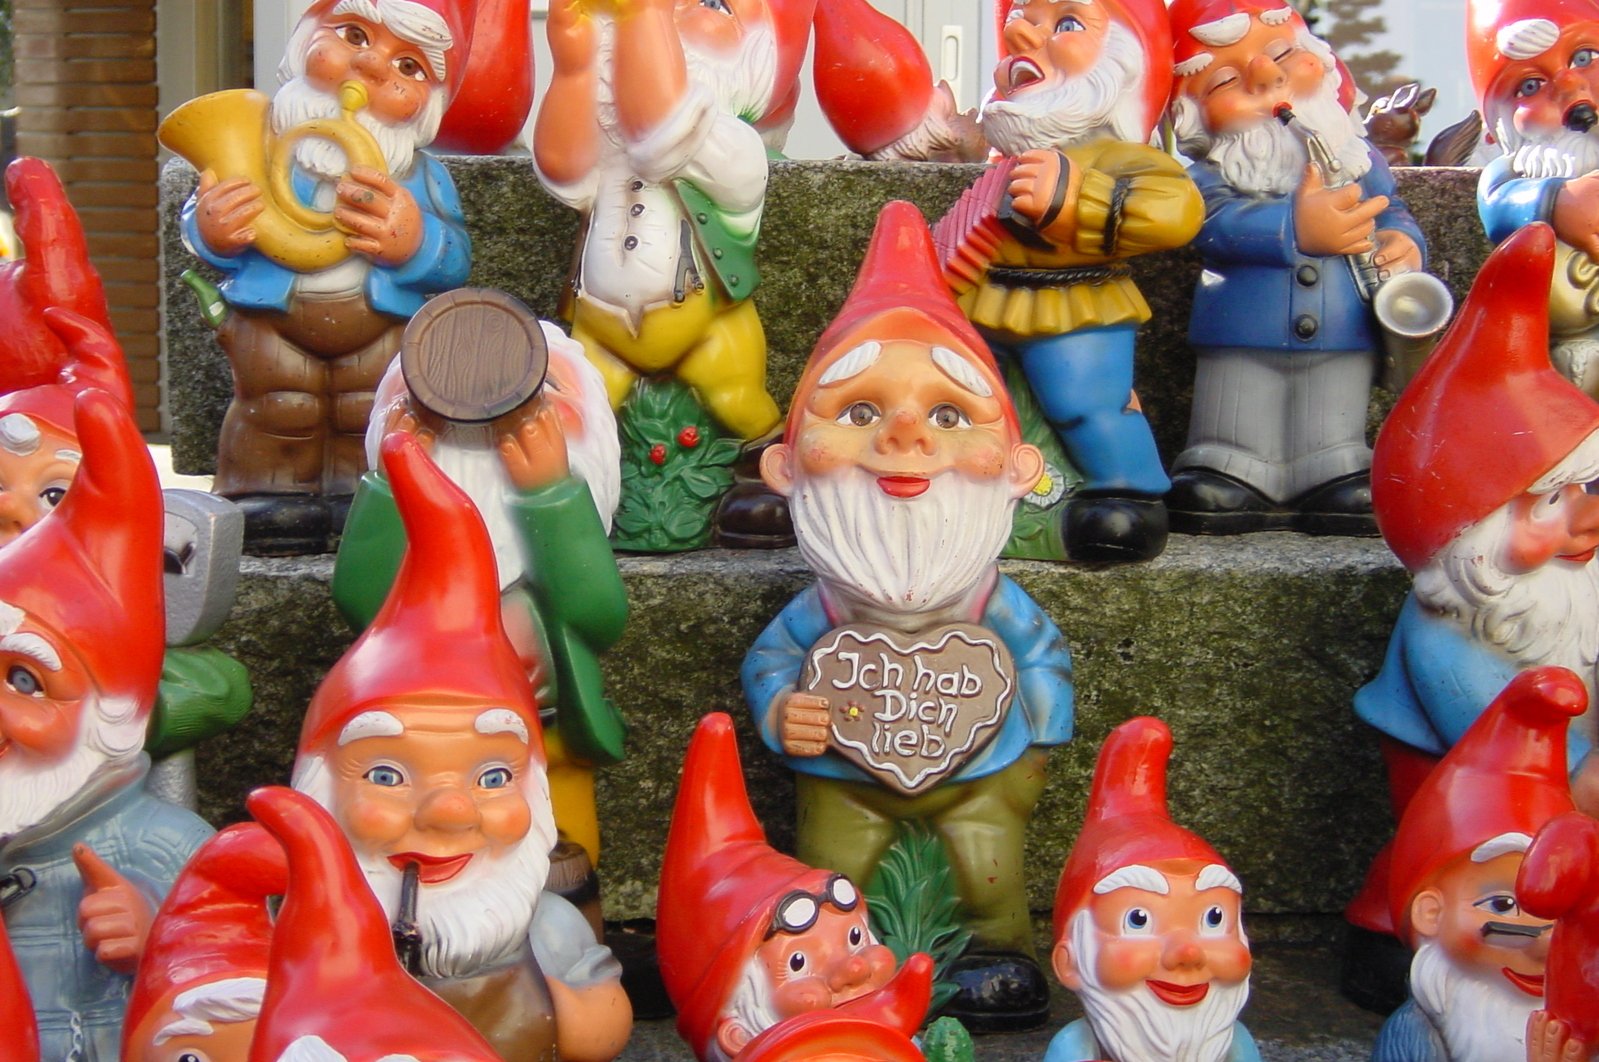 a display of garden gnomes and gnome statues